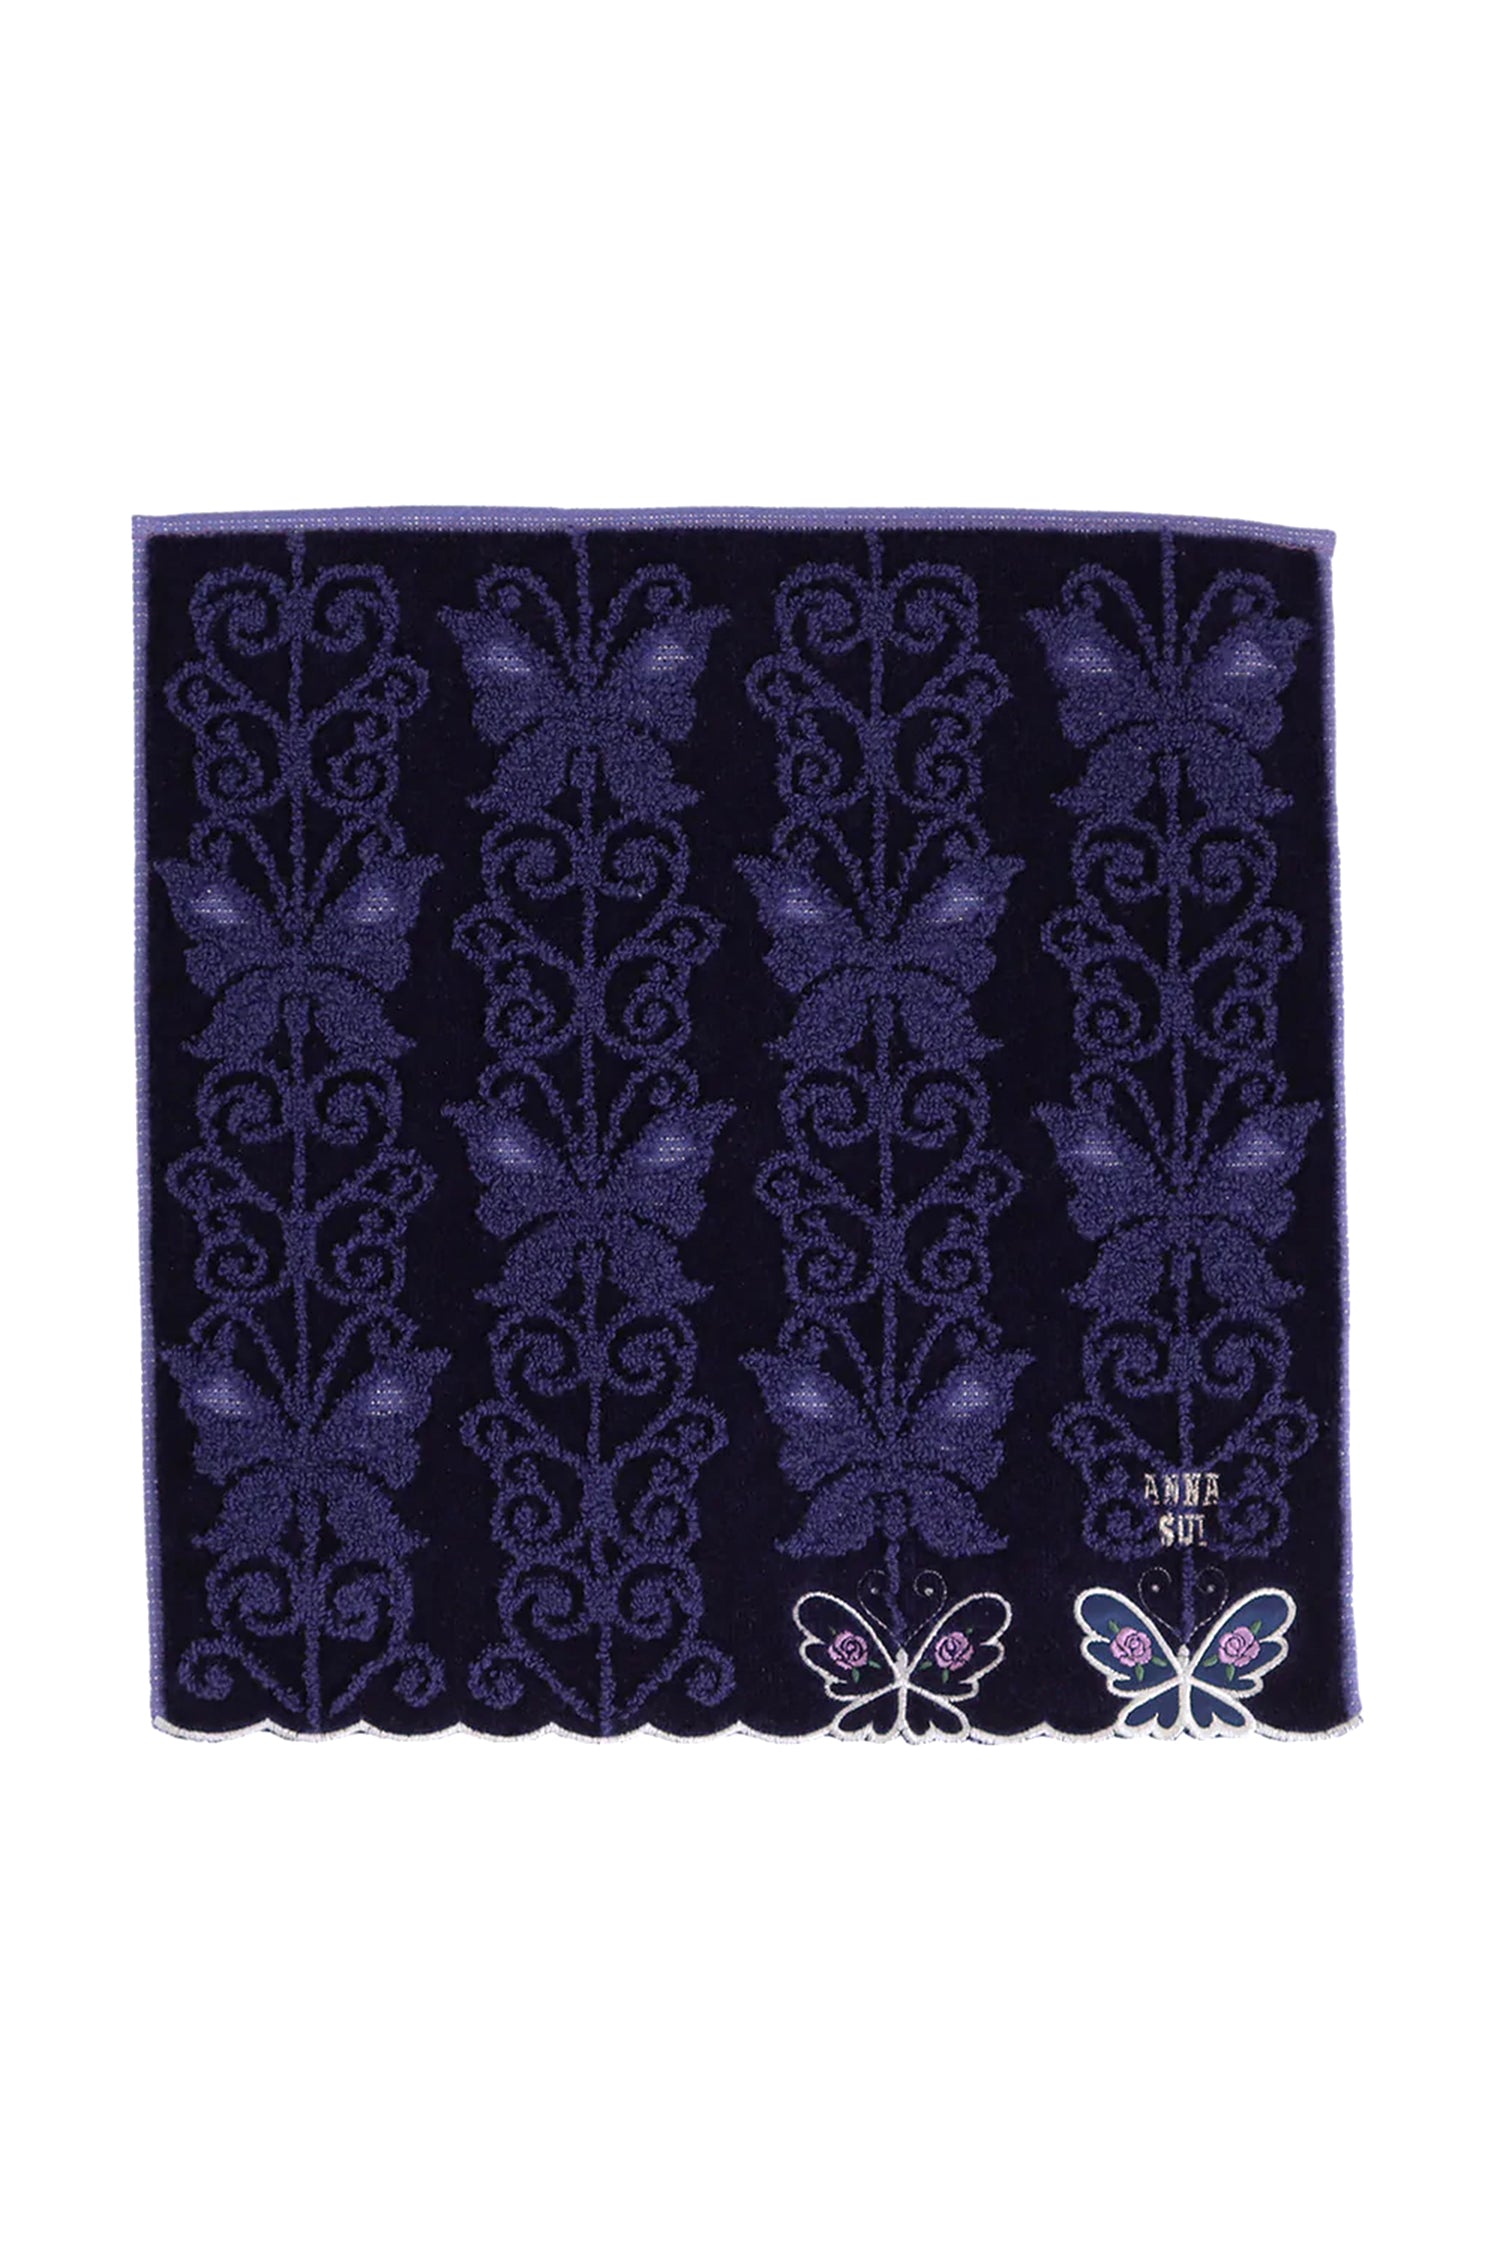 Dark blue Washcloth, purple butterfly pattern small floral details, 2 white butterflies, Anna Sui label 